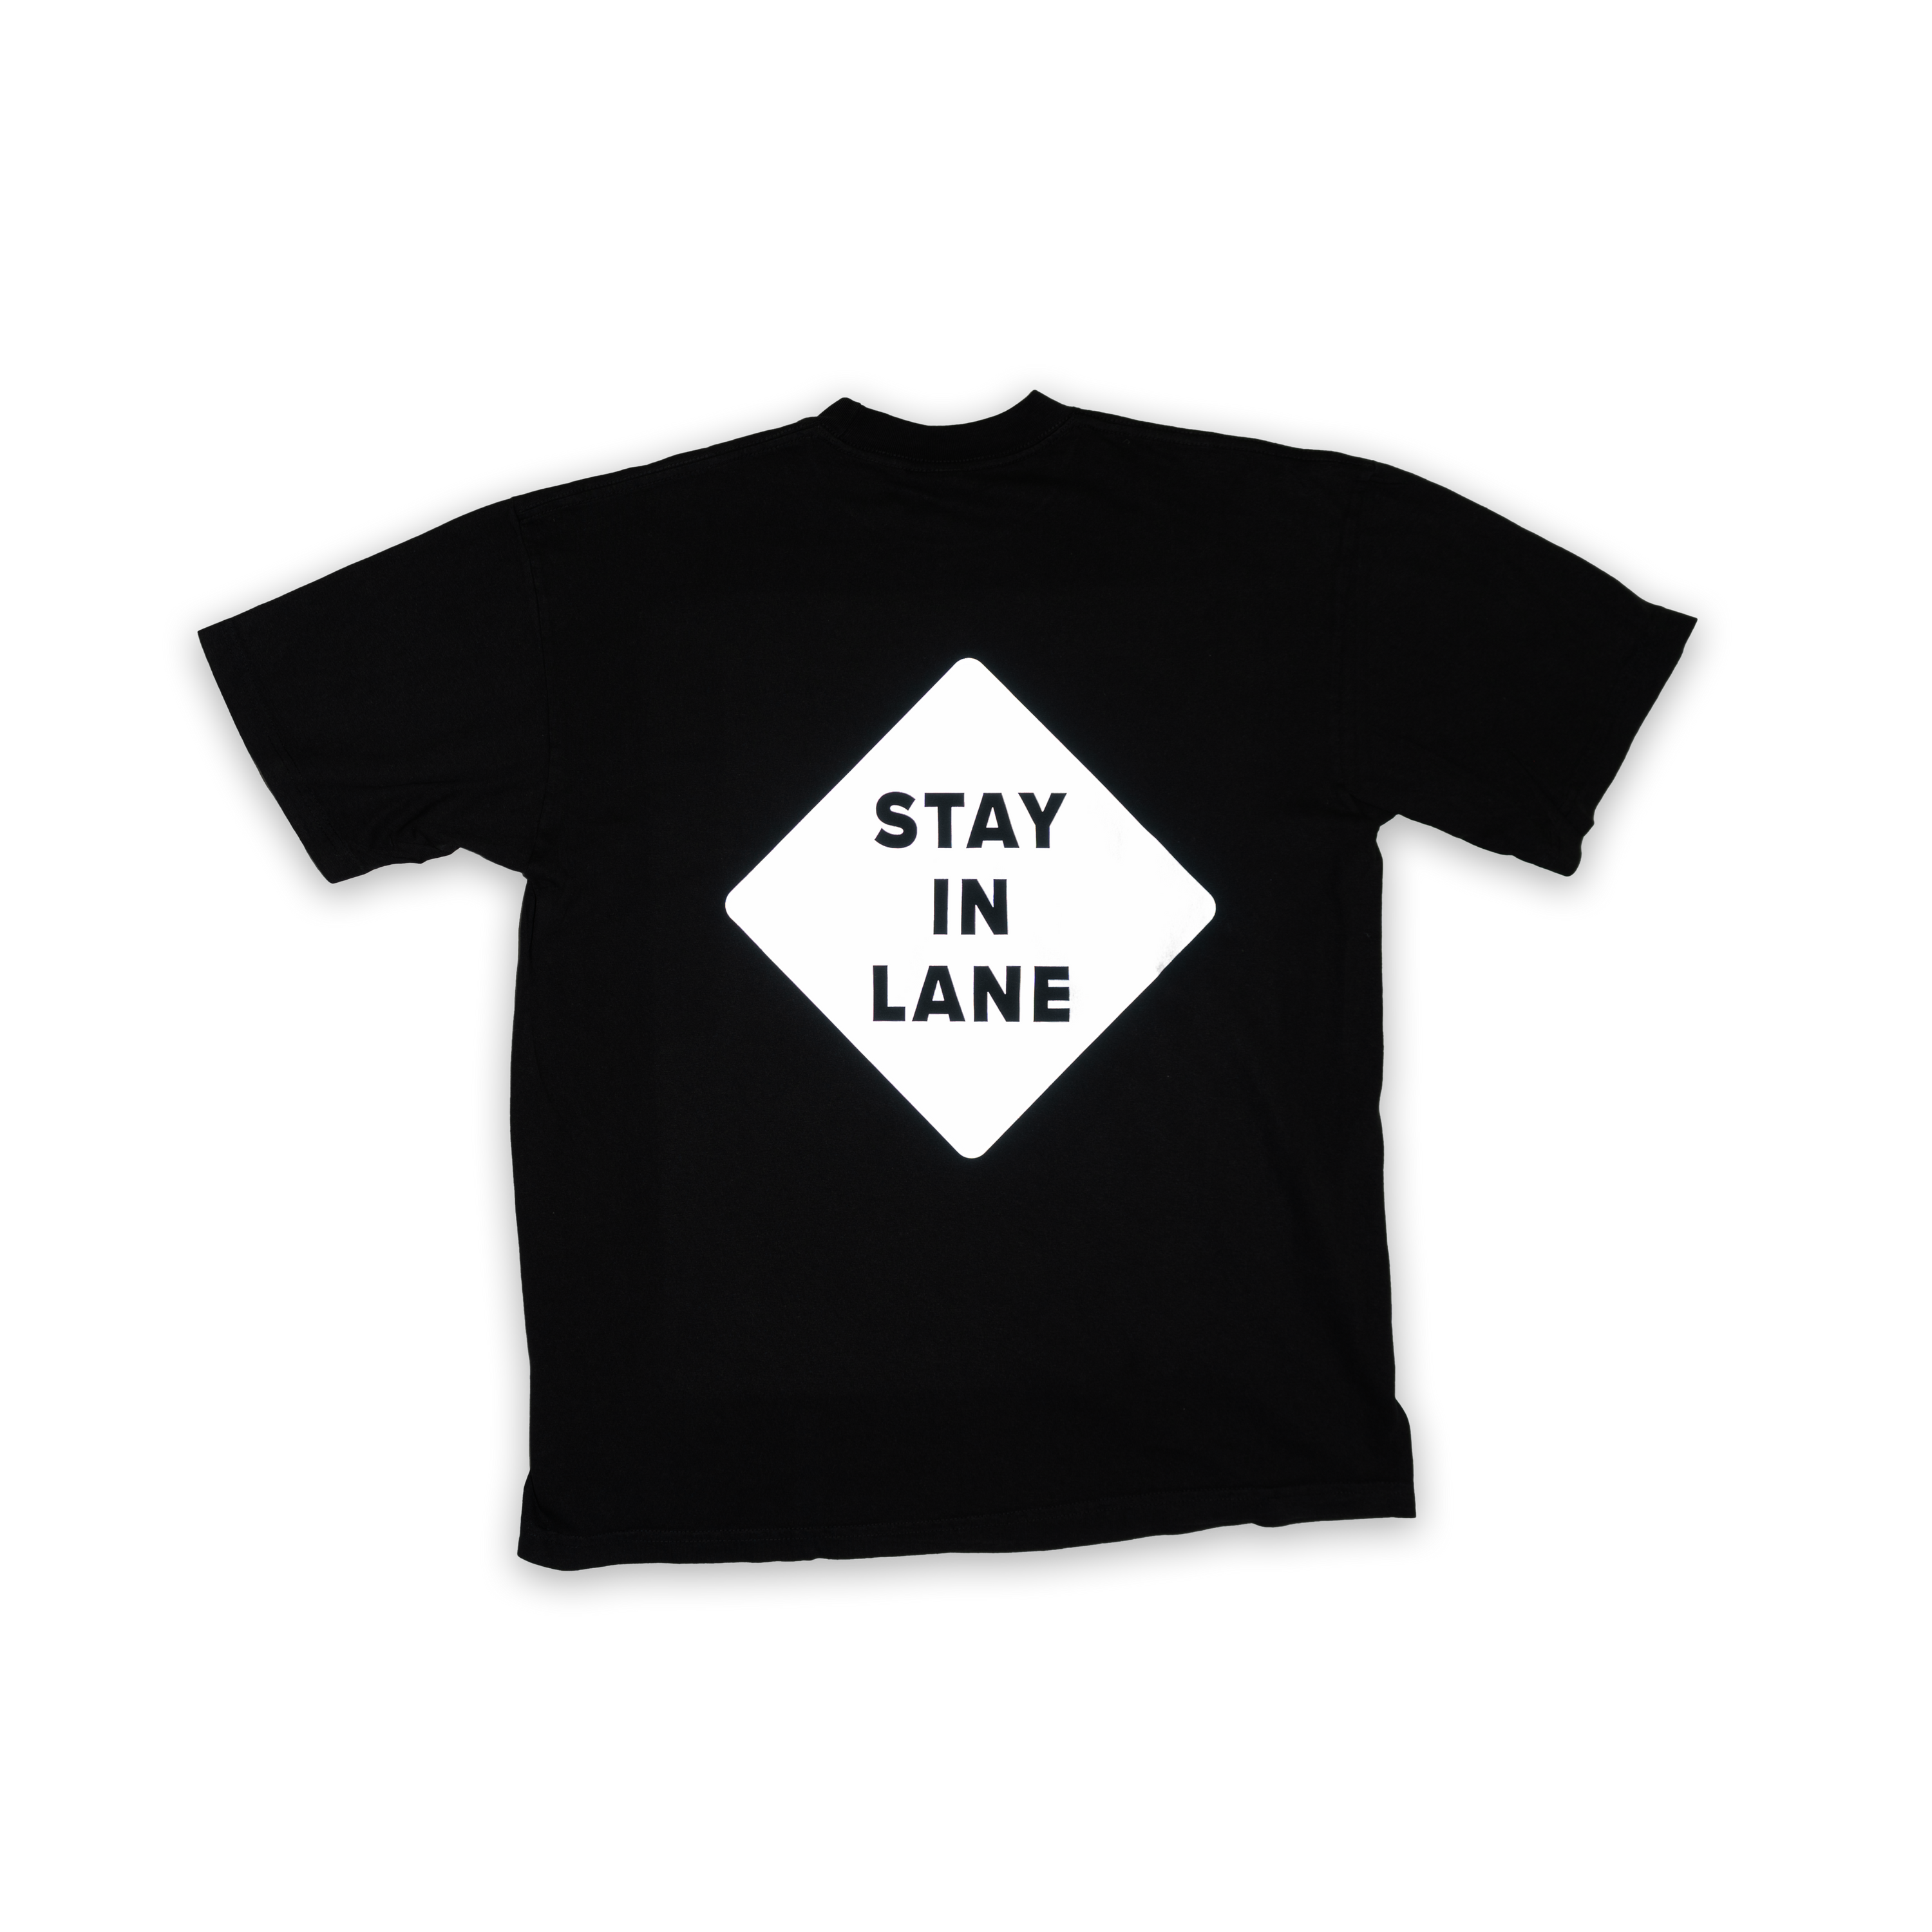 "Stay in Lane" Reflective Black Tee